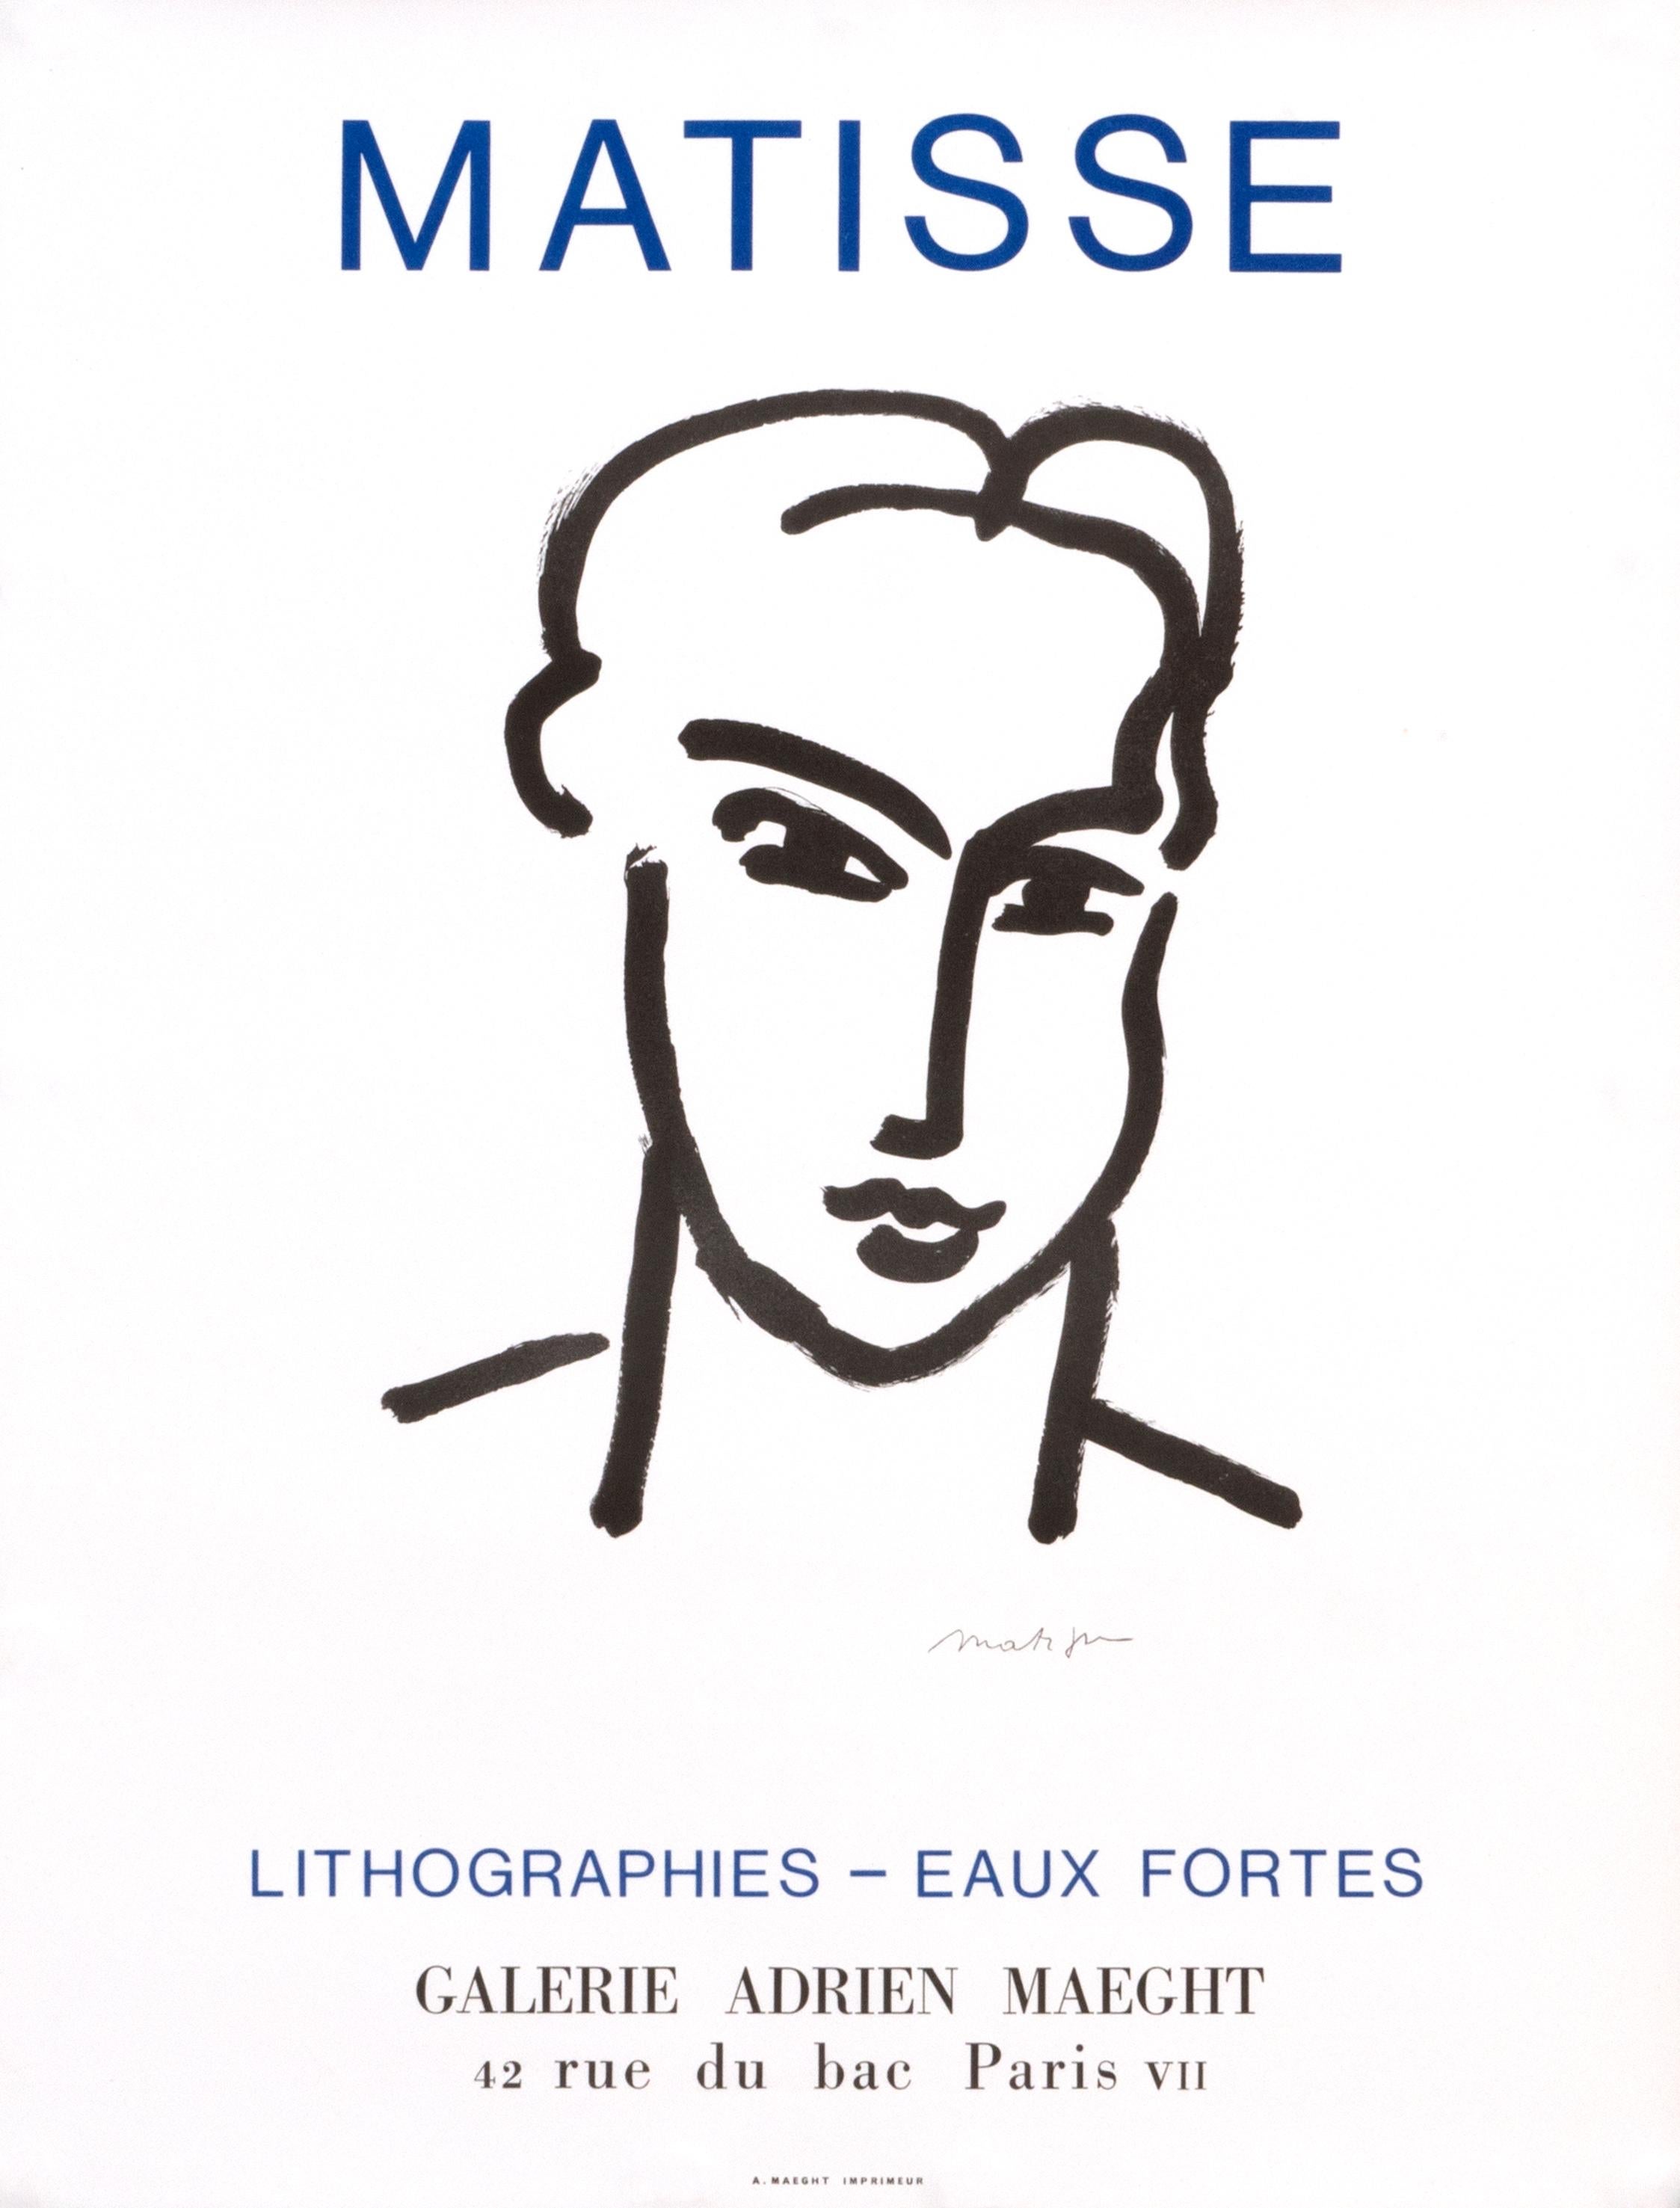 "Matisse Lithographies - Eaux Fortes, Galerie Adrien Maeght" Exhibition Poster - Print by Henri Matisse